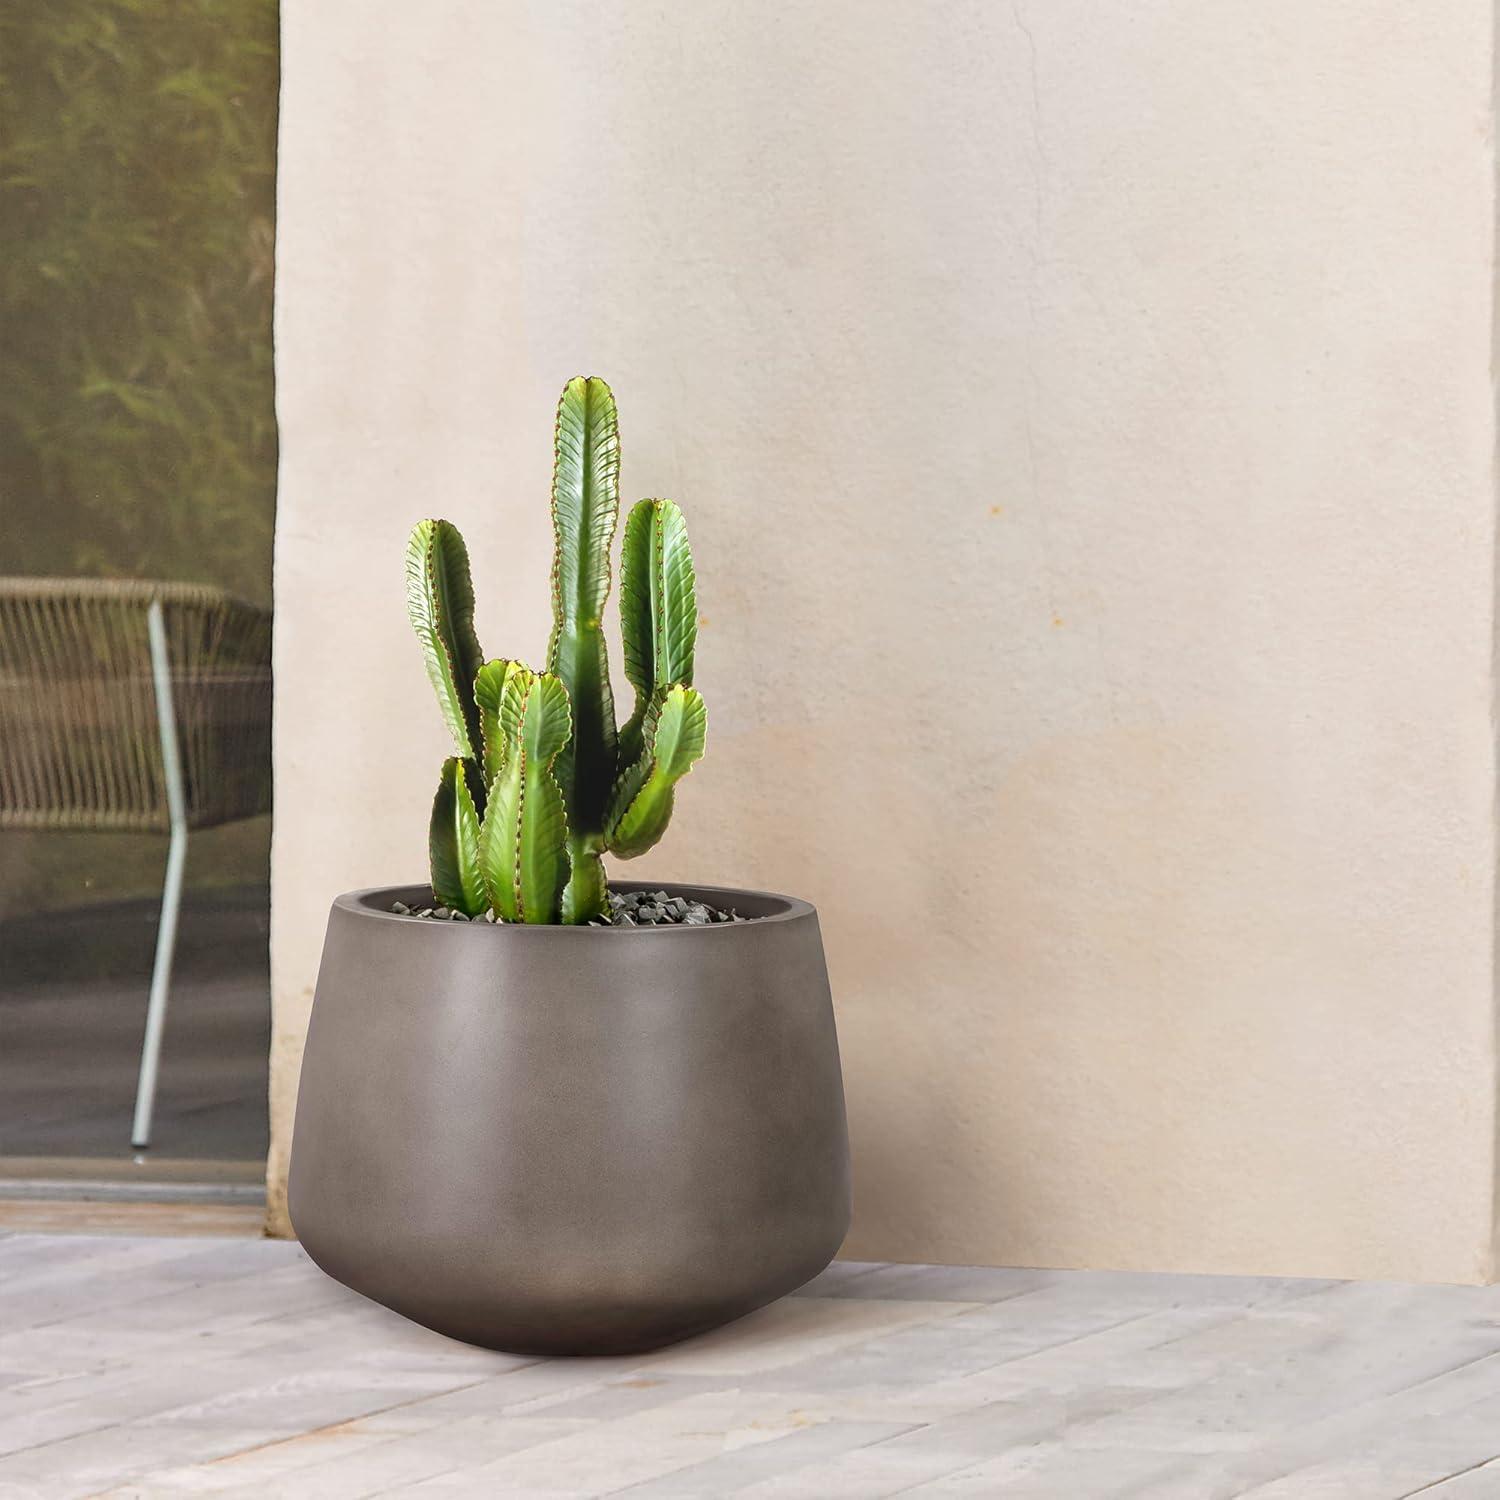 Amethyst 14" Lightweight Concrete Planter for Indoors & Outdoors in Gray